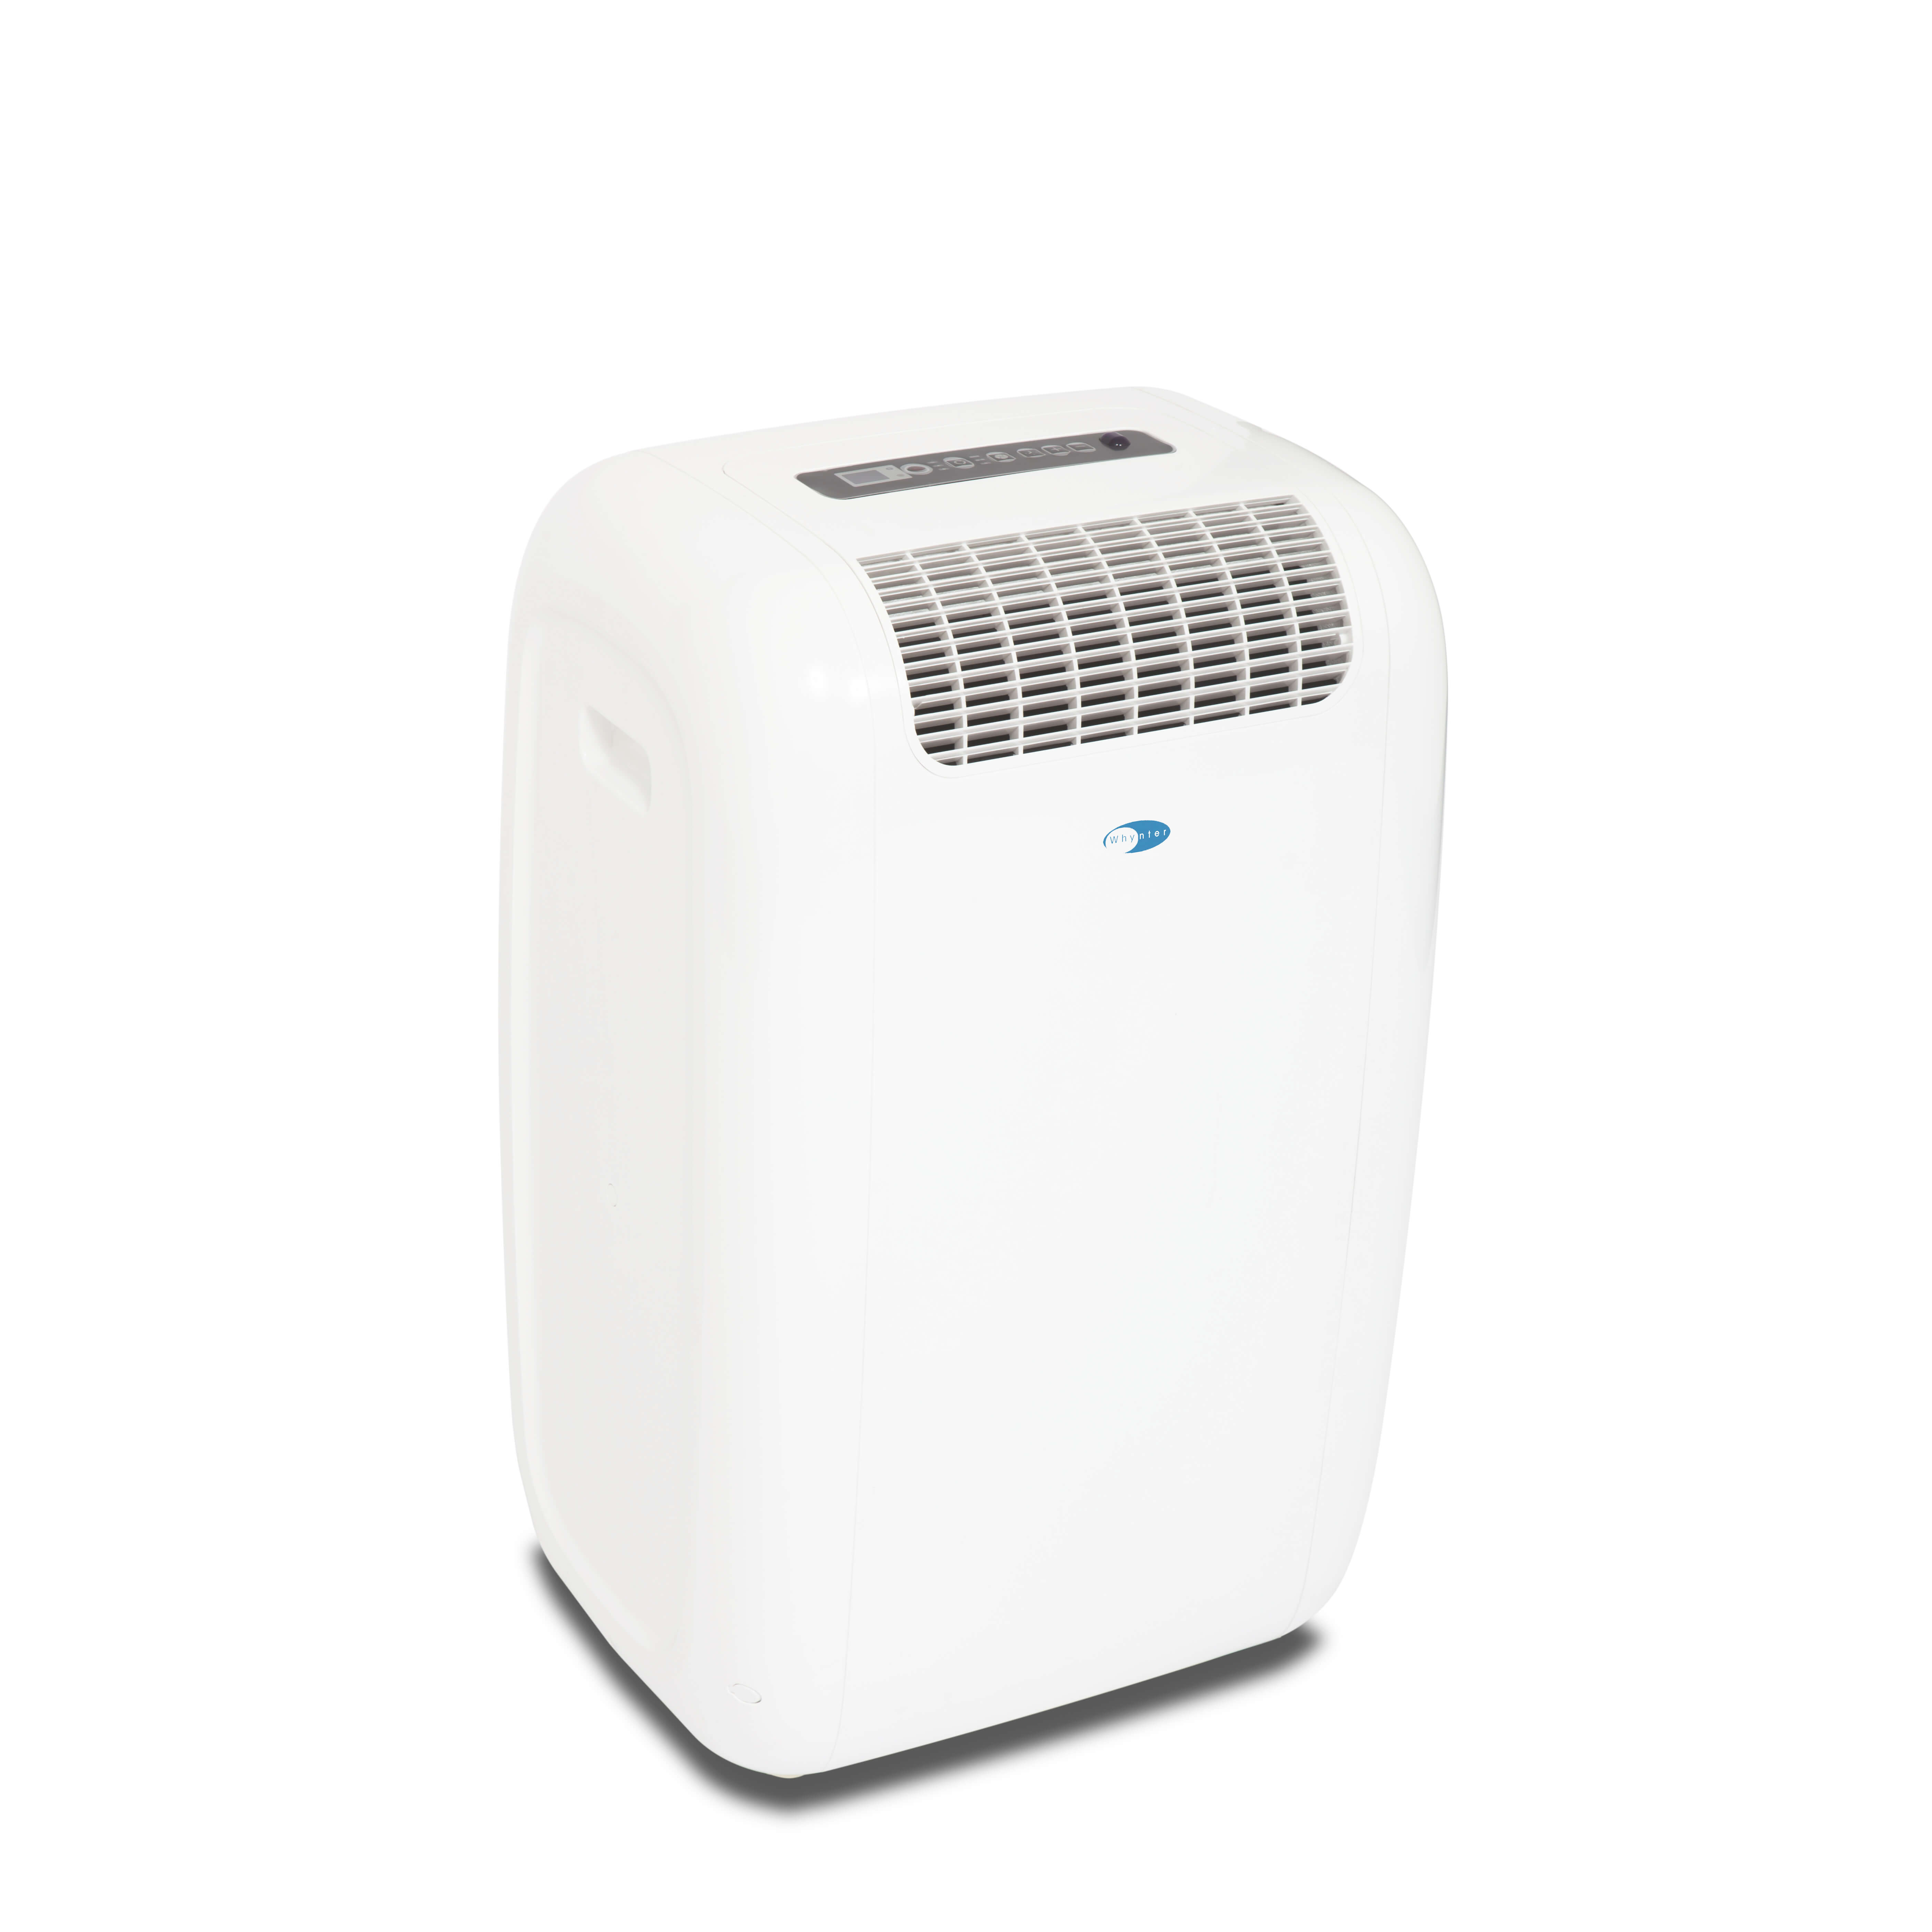 Portable Room Air Conditioners Are Gaining In Popularity